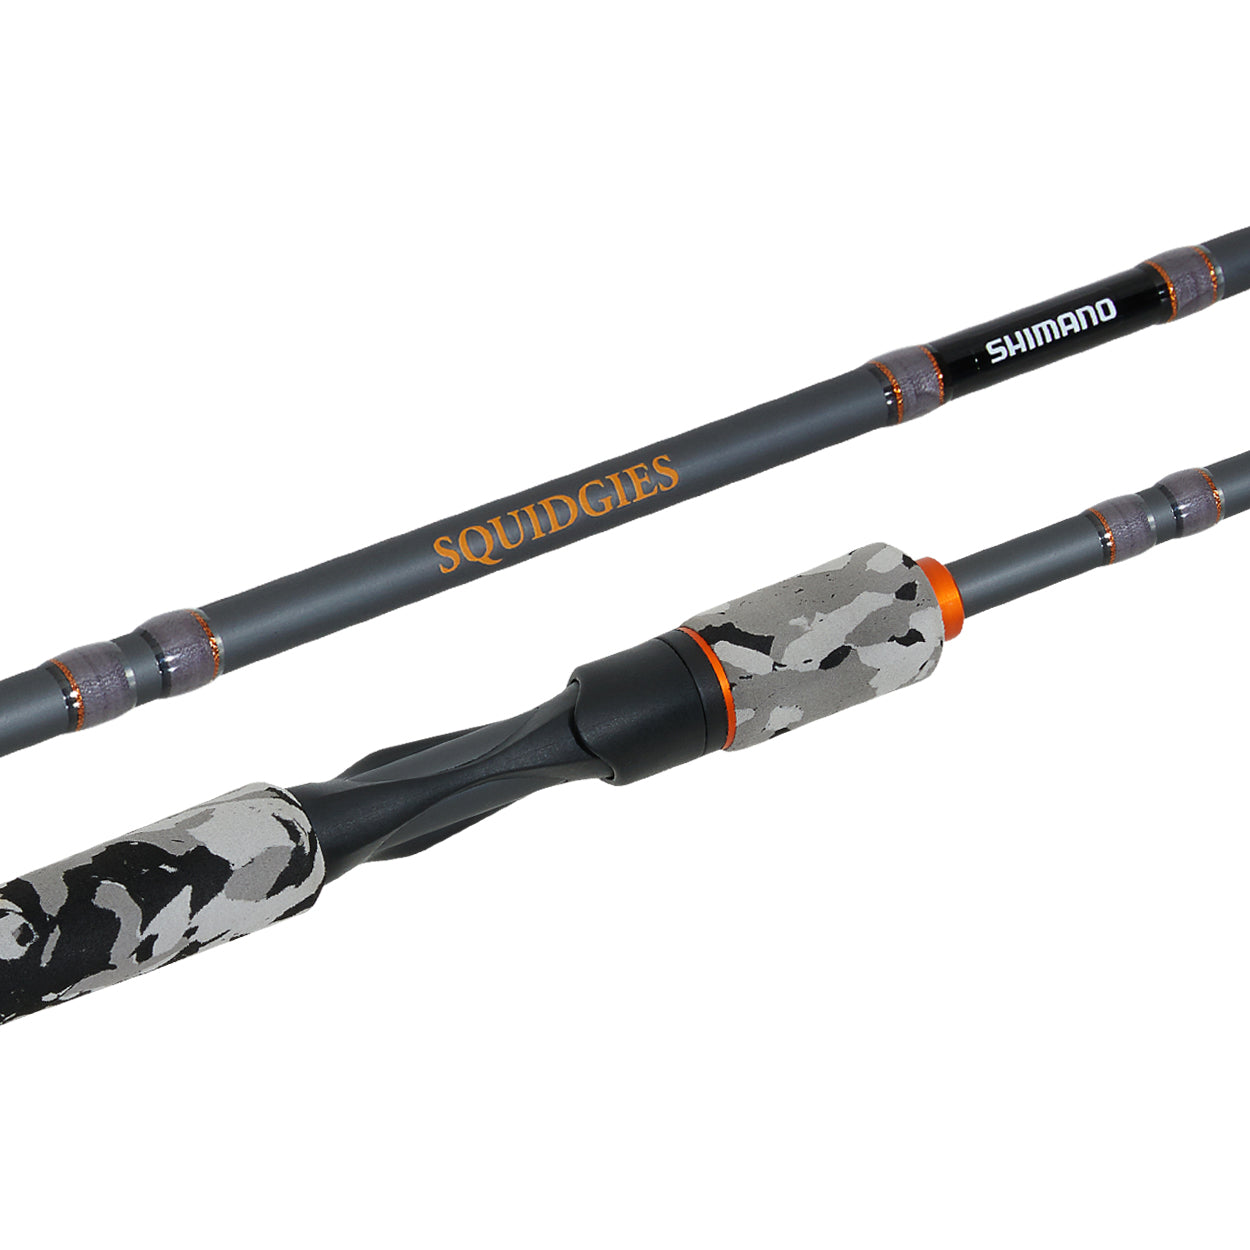 Shakespeare Ugly Stik Bluewater Spin Rod